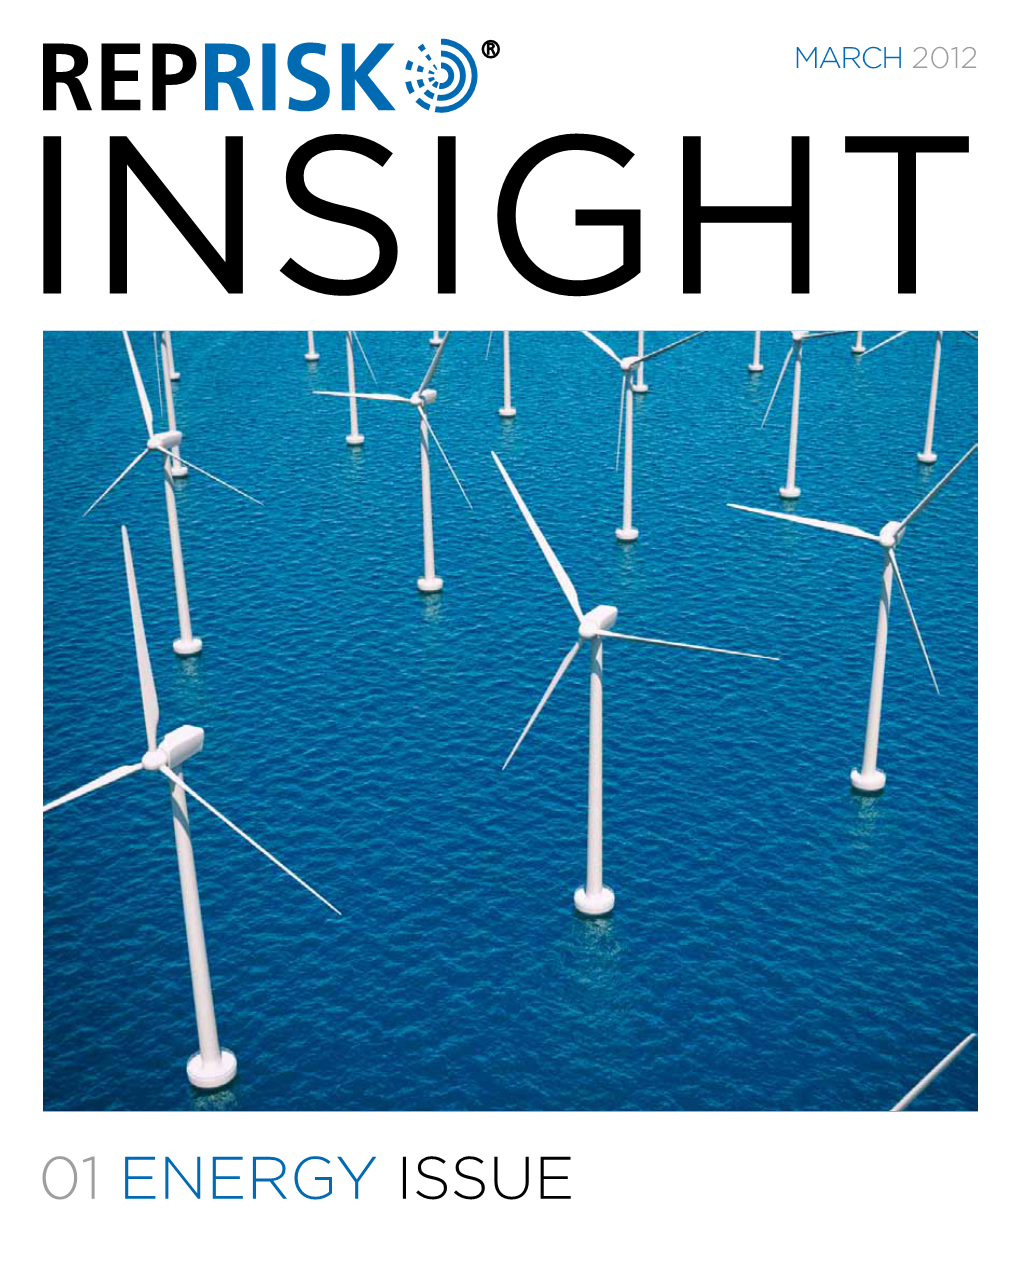 Reprisk Insight, Our Industry E-Zine That Focuses on ESG Risk Issues in the Corporate World